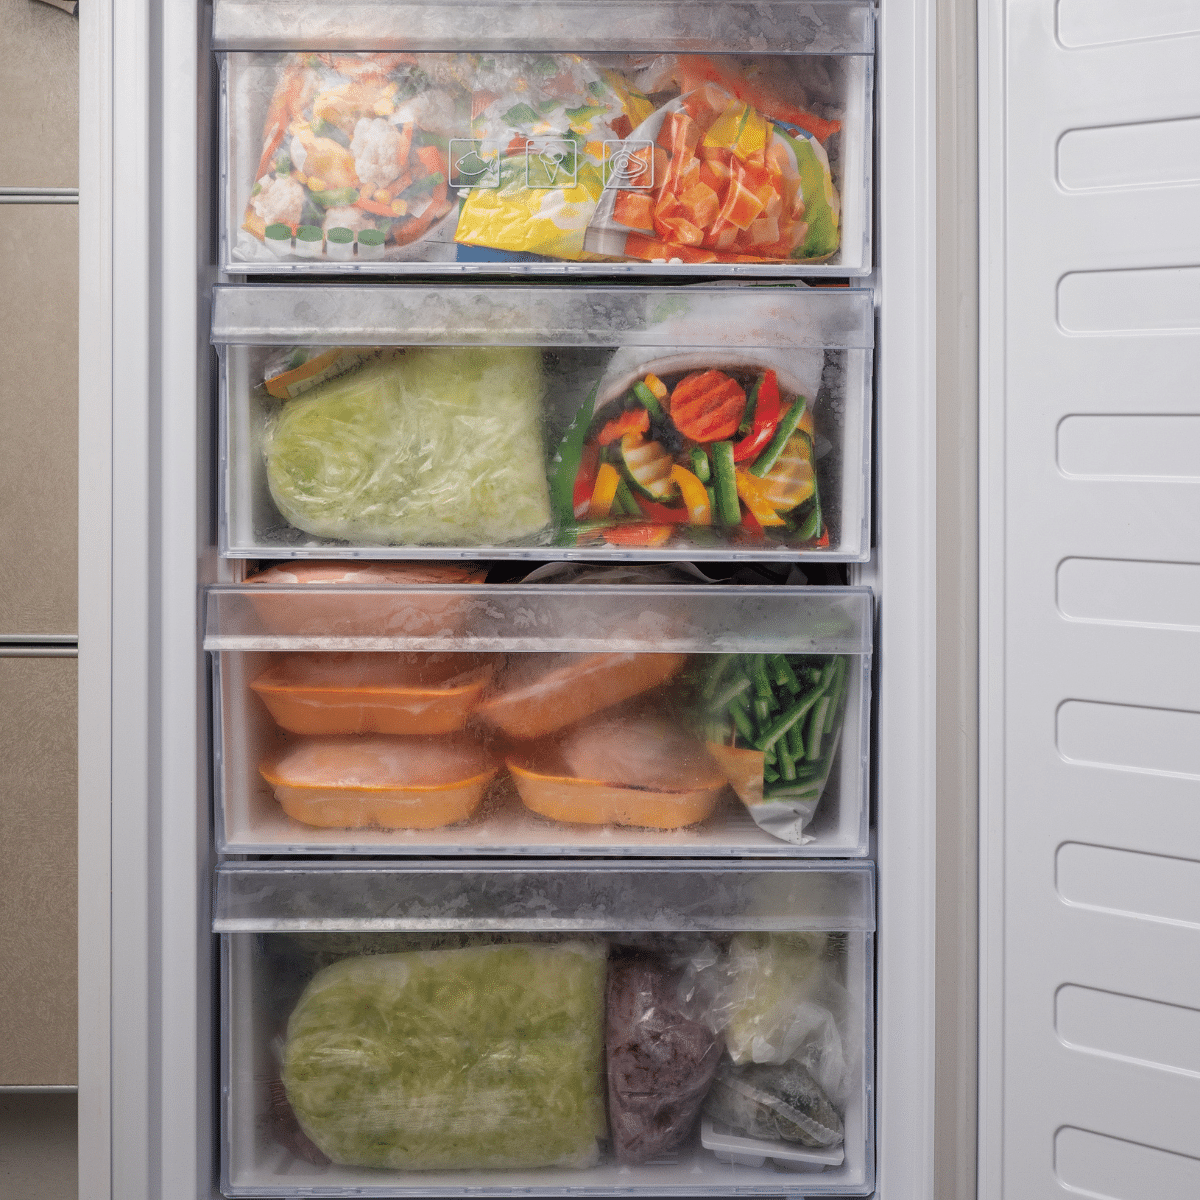 https://midwestmodernmomma.com/wp-content/uploads/2023/07/Freezer-Drawers.png